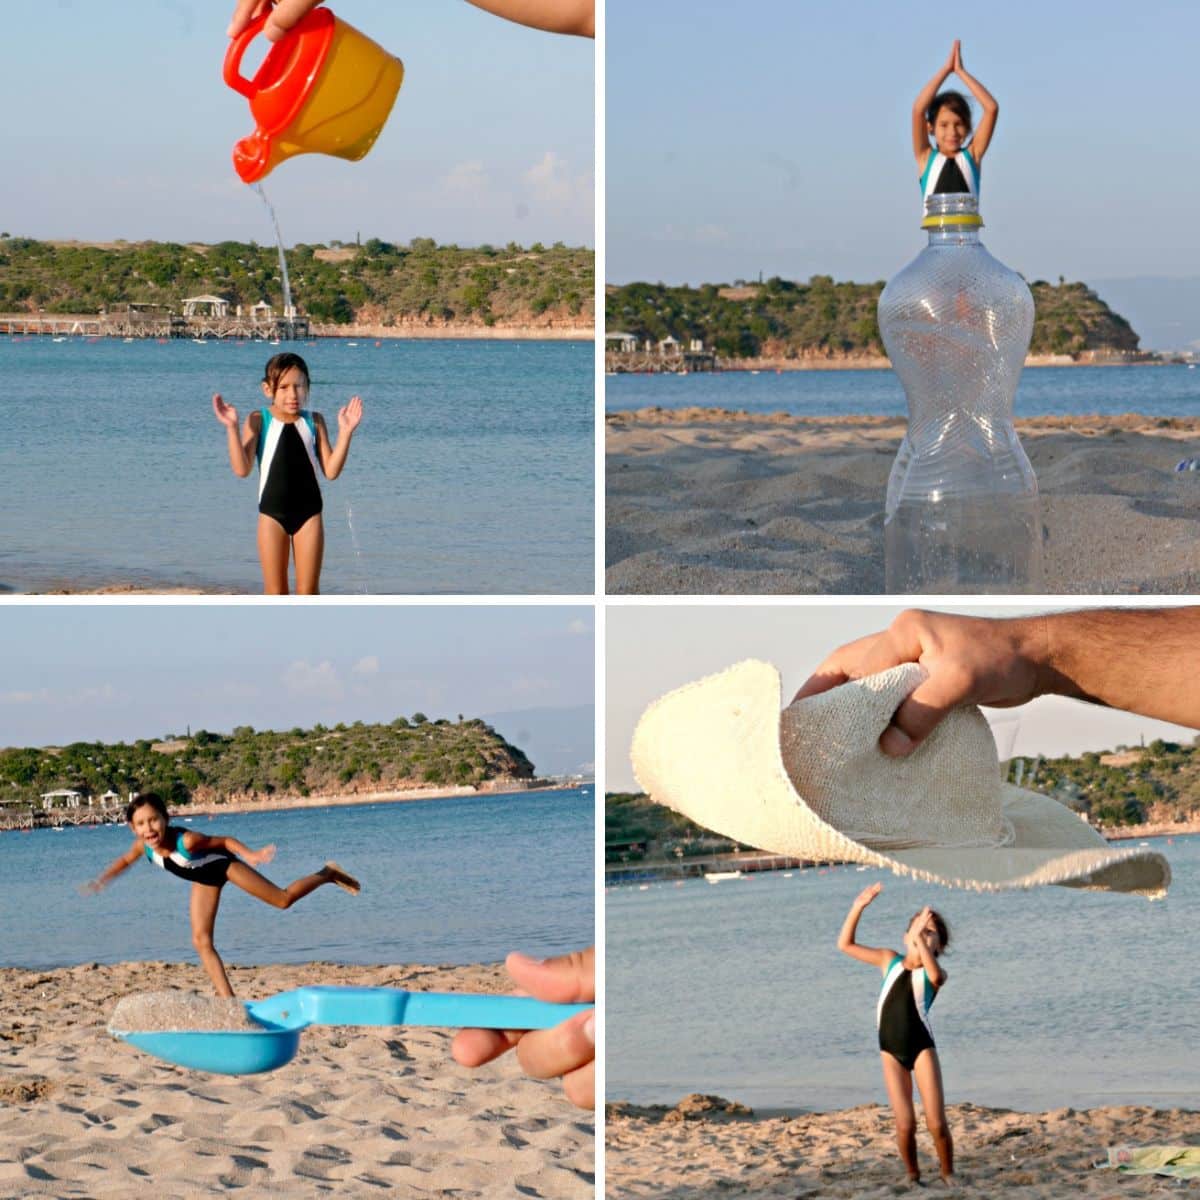 4 images of forced perspective fun pictures.